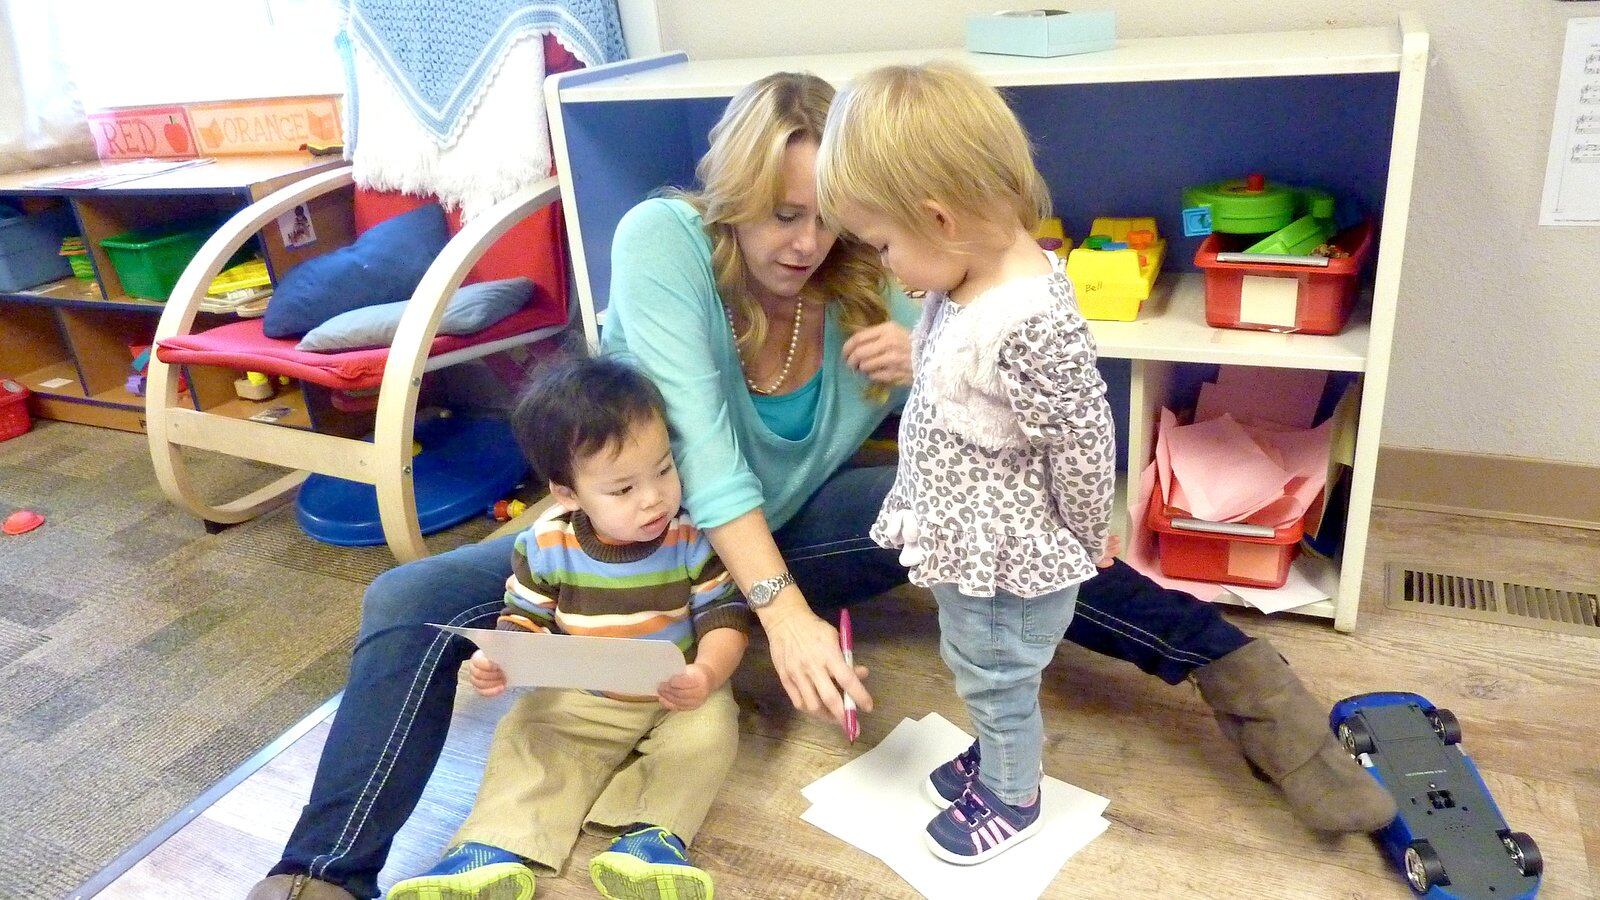 Loveland's Teaching Tree Early Childhood Learning Center was one of the first two centers in the state to get a Level 5 rating in the Colorado Shines rating system.